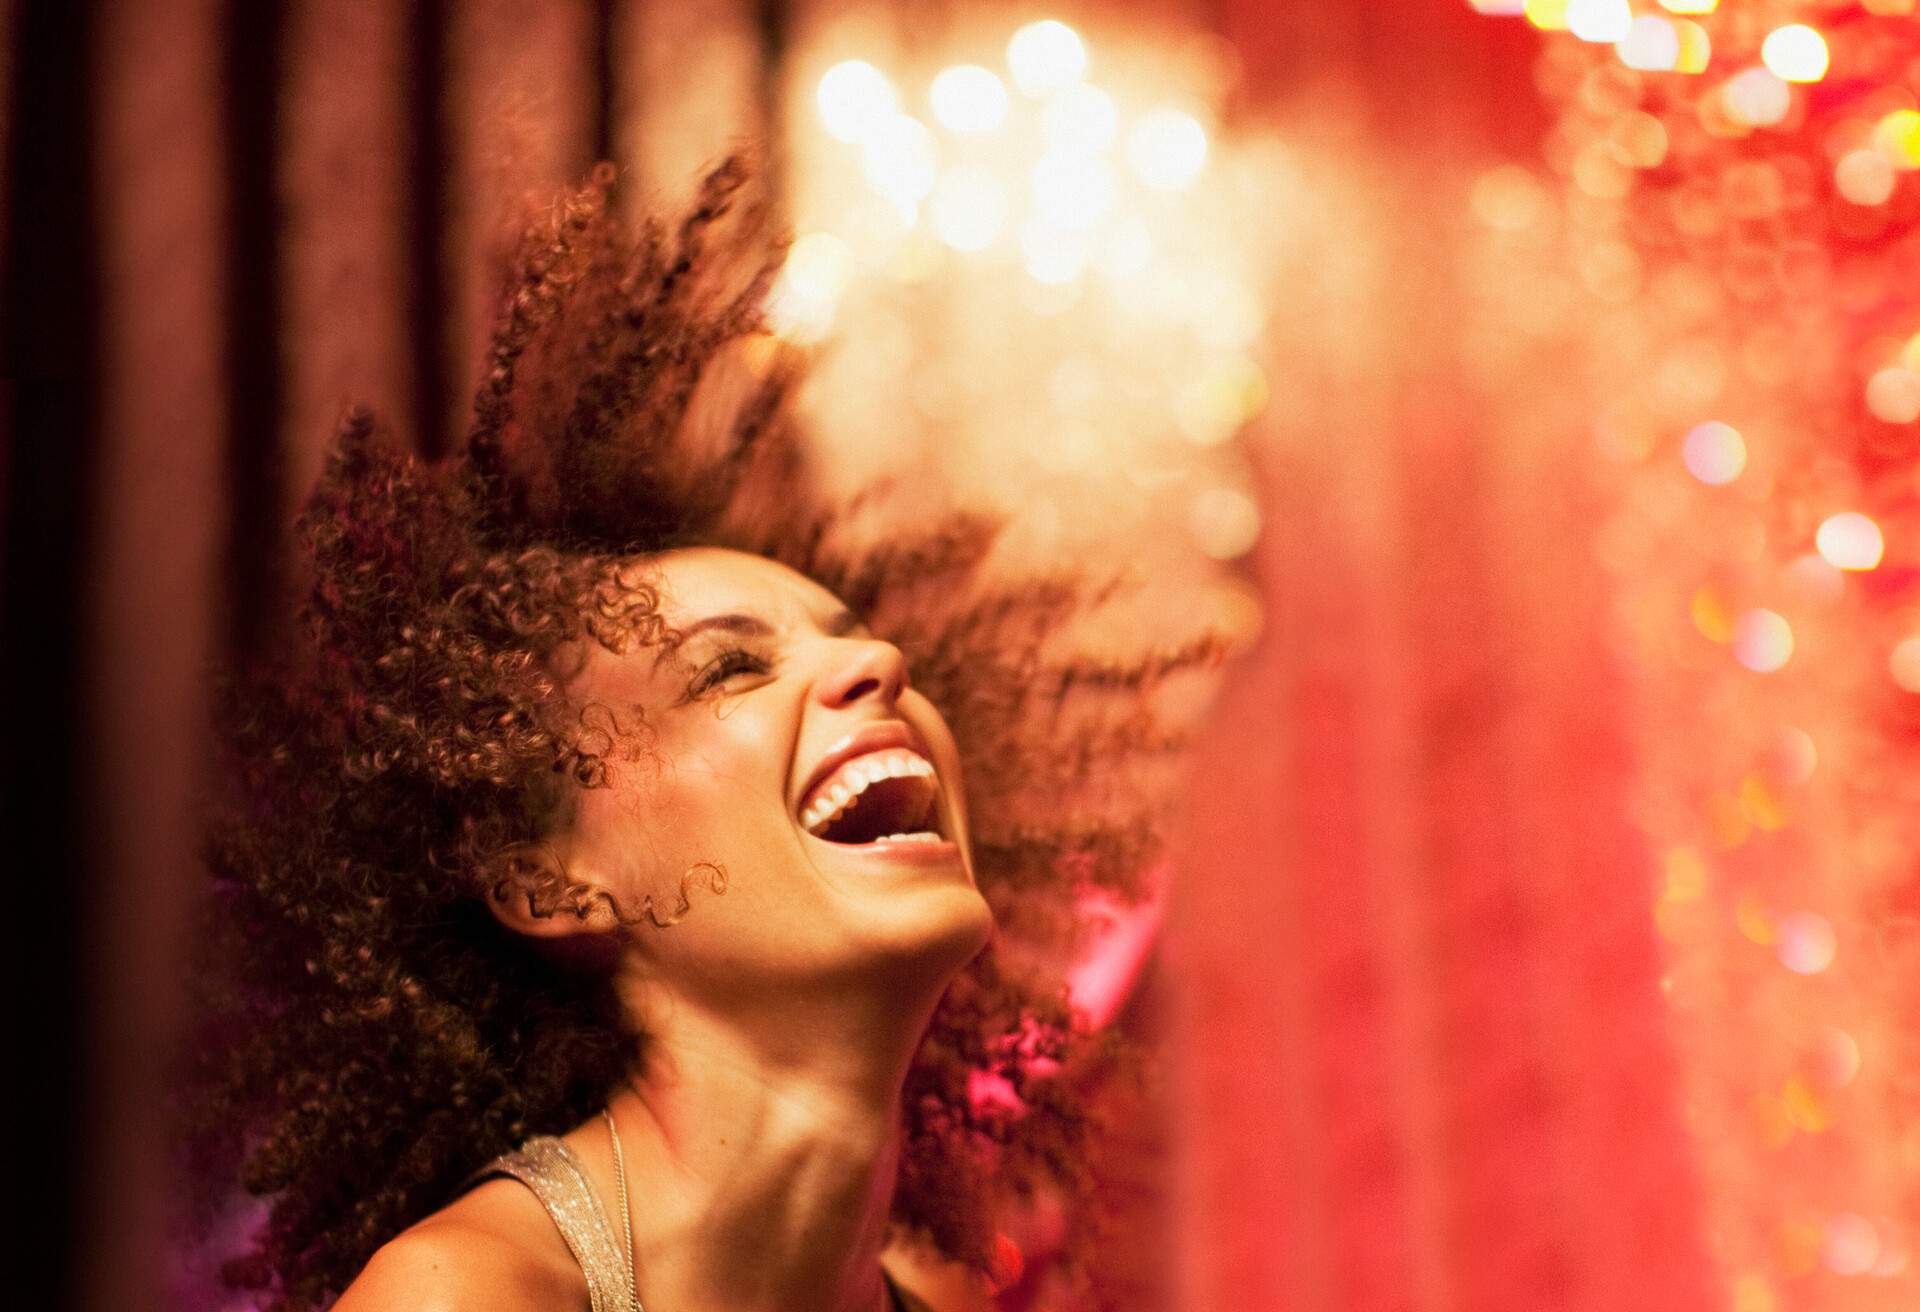 Laughing woman with afro hair with red lights background behind her.